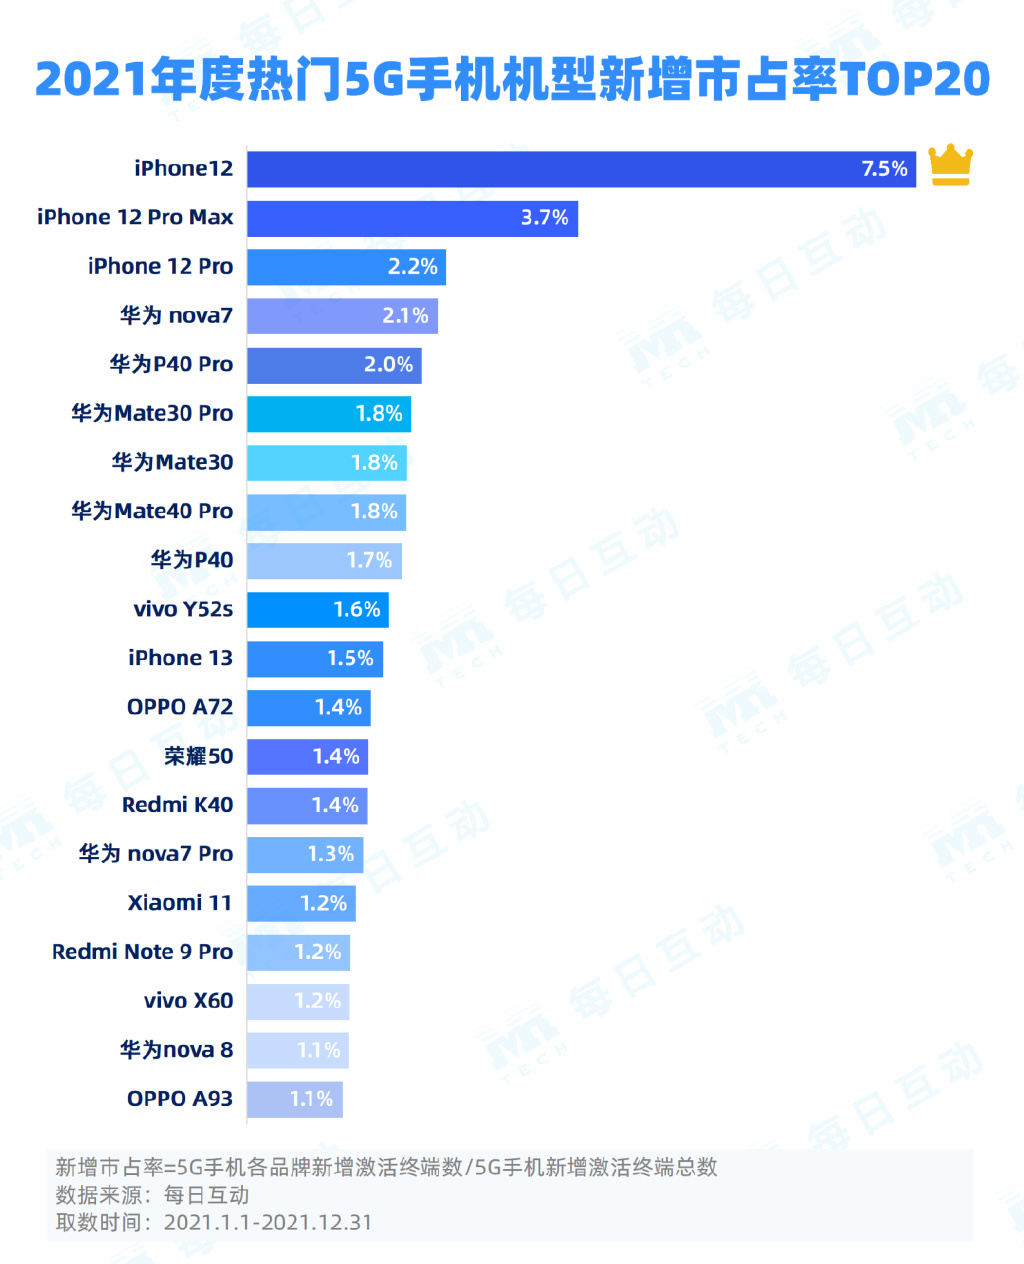 Huawei ranks first in 5G mobile market share-4